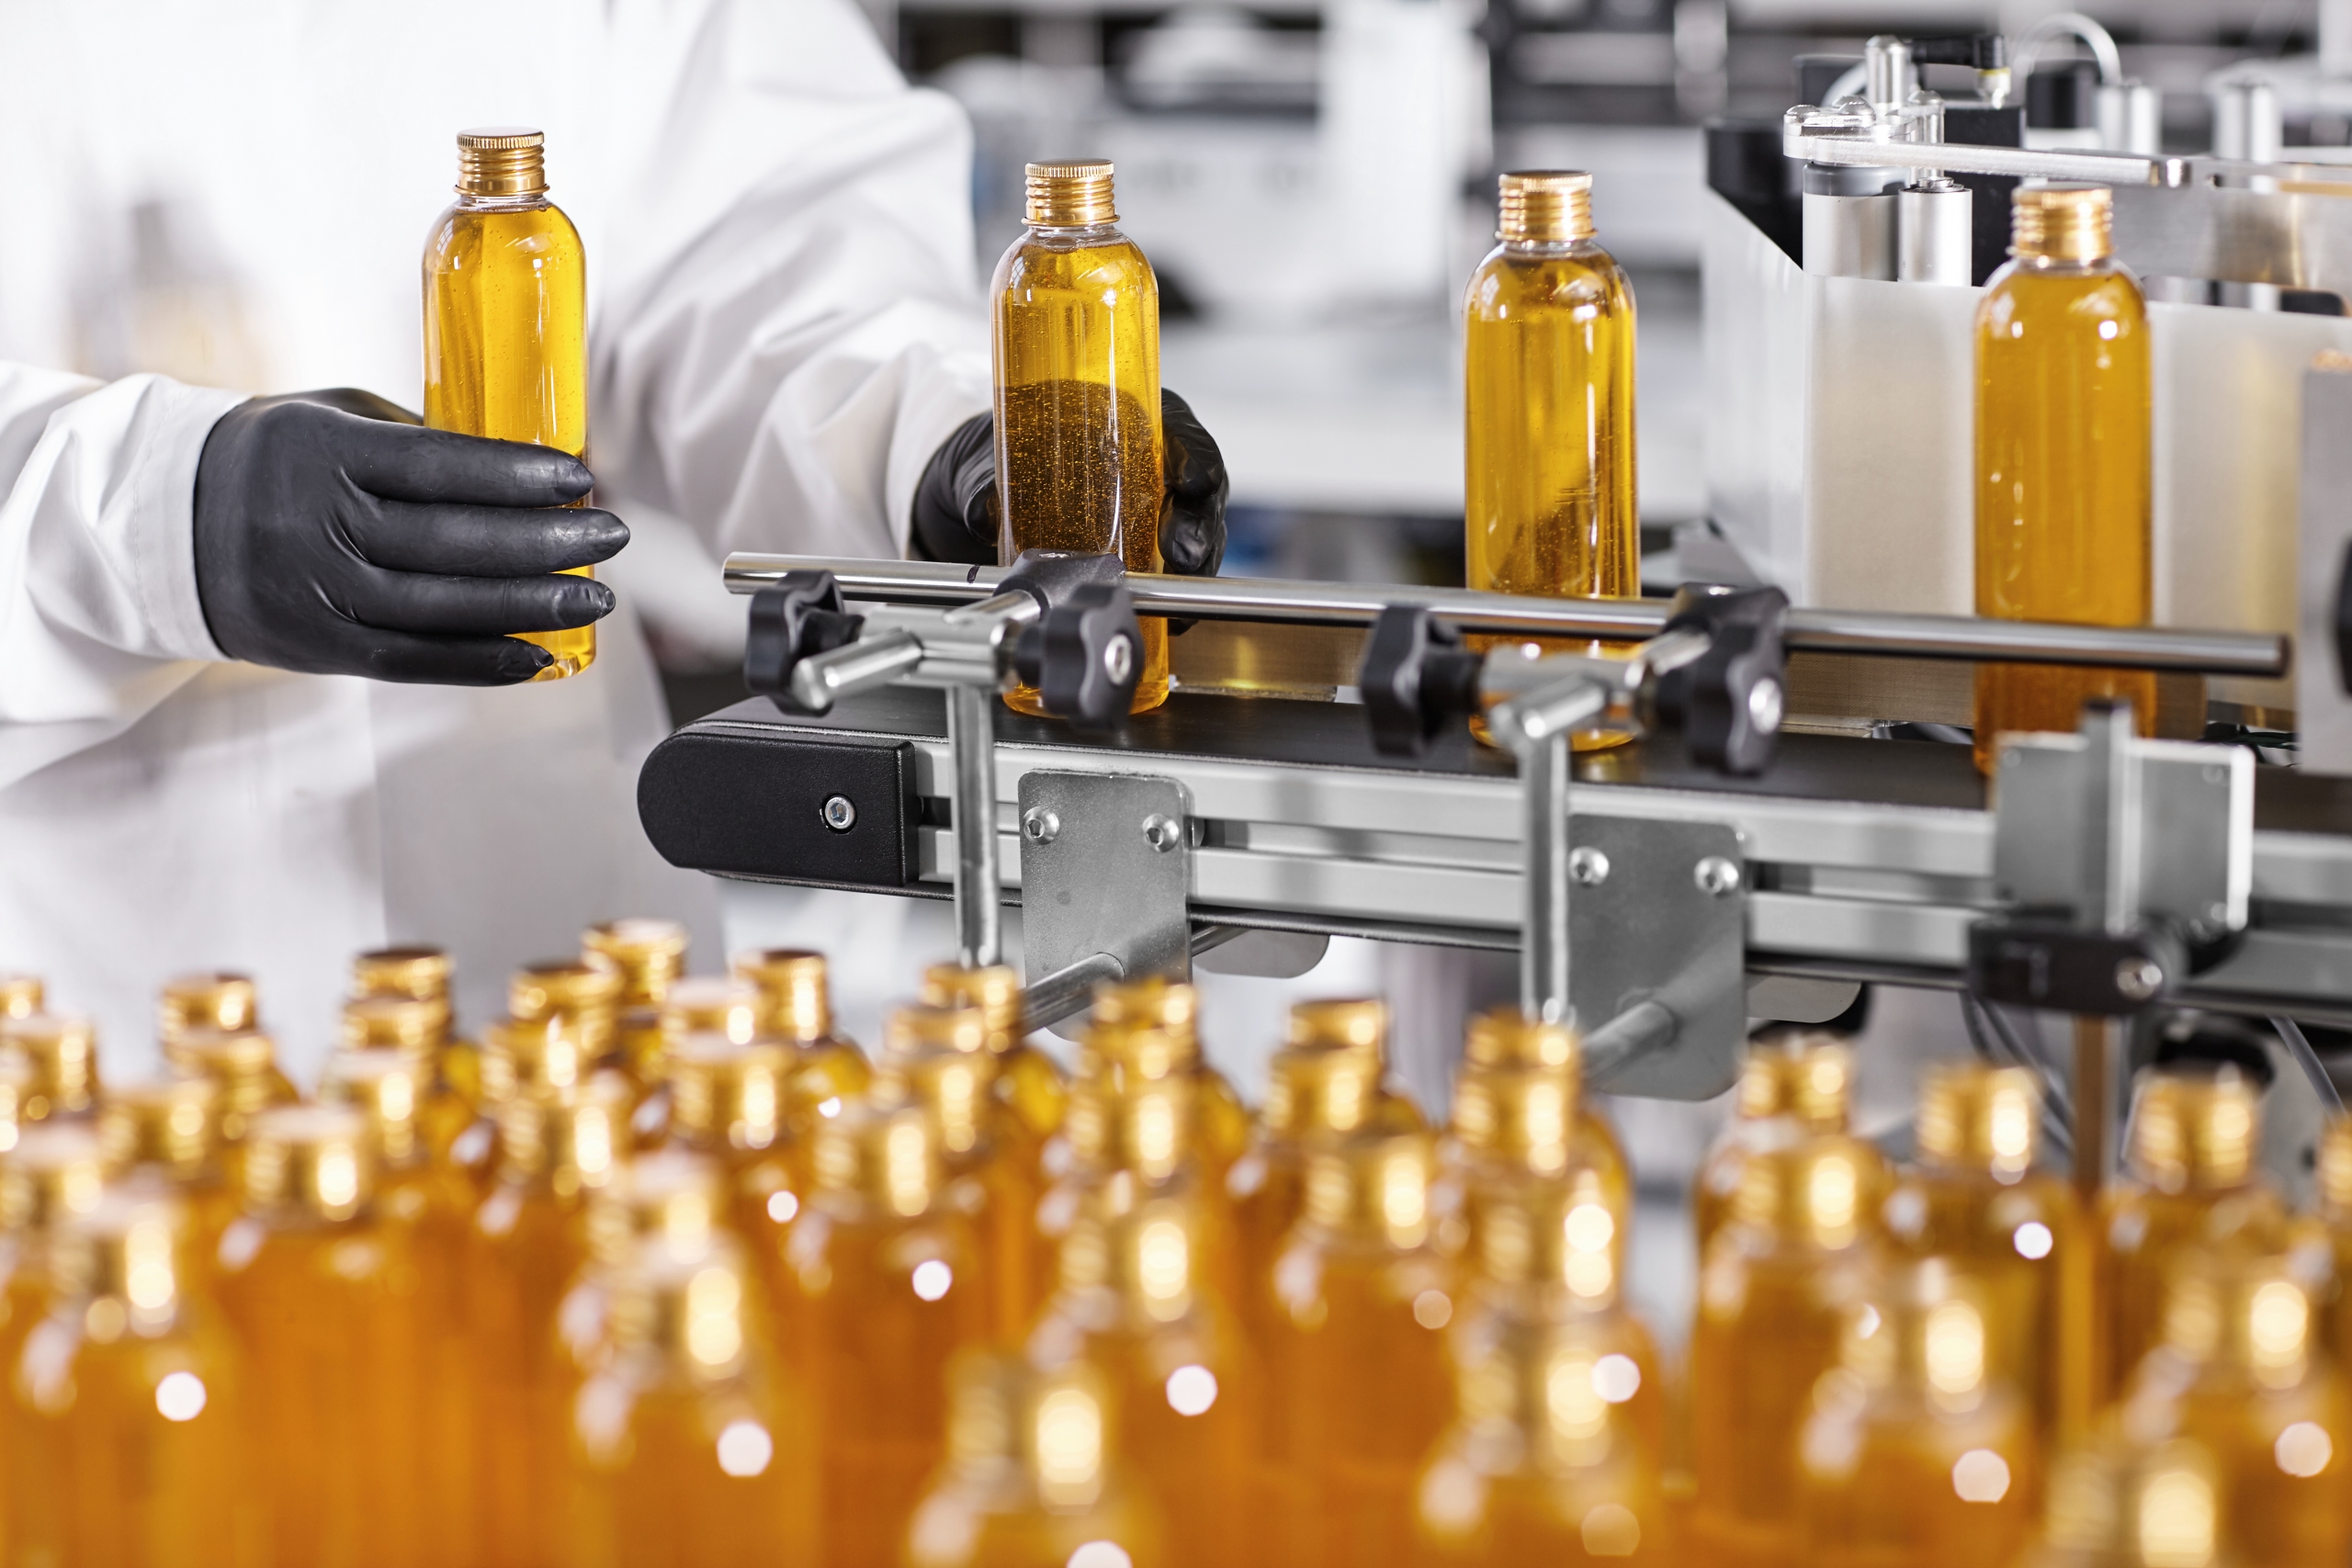 Plastic bottles with yellow liquid substance of shampoo, shower gel or soap standing in rows on assembly line at factory. Researcher in black gloves working at production line in modern laboratory